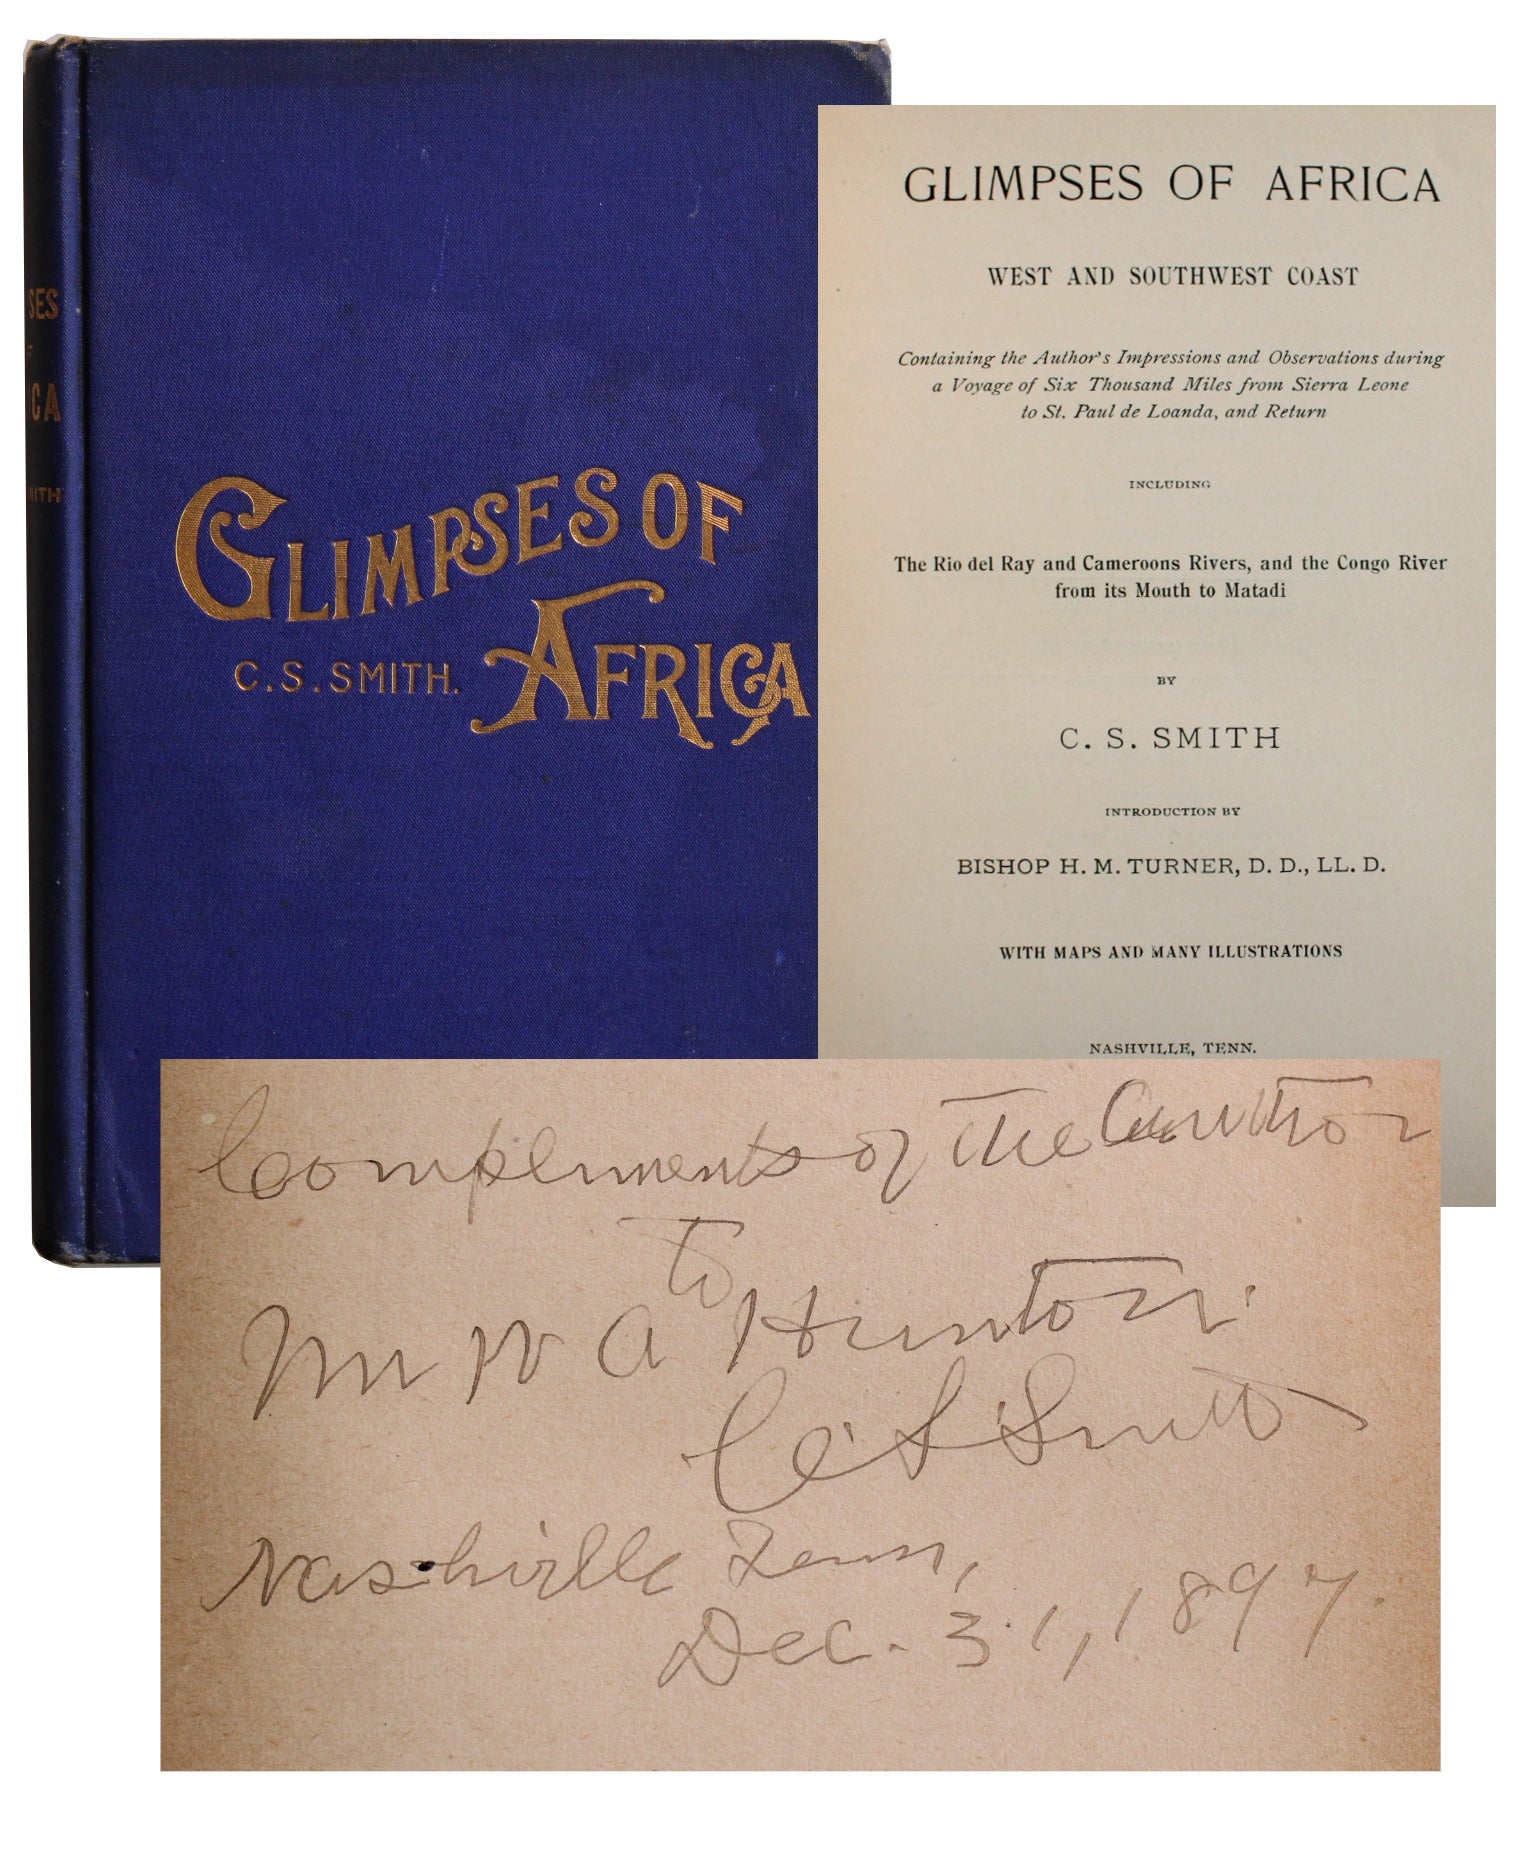 Glimpses of Africa. Smith, harles, pencer.